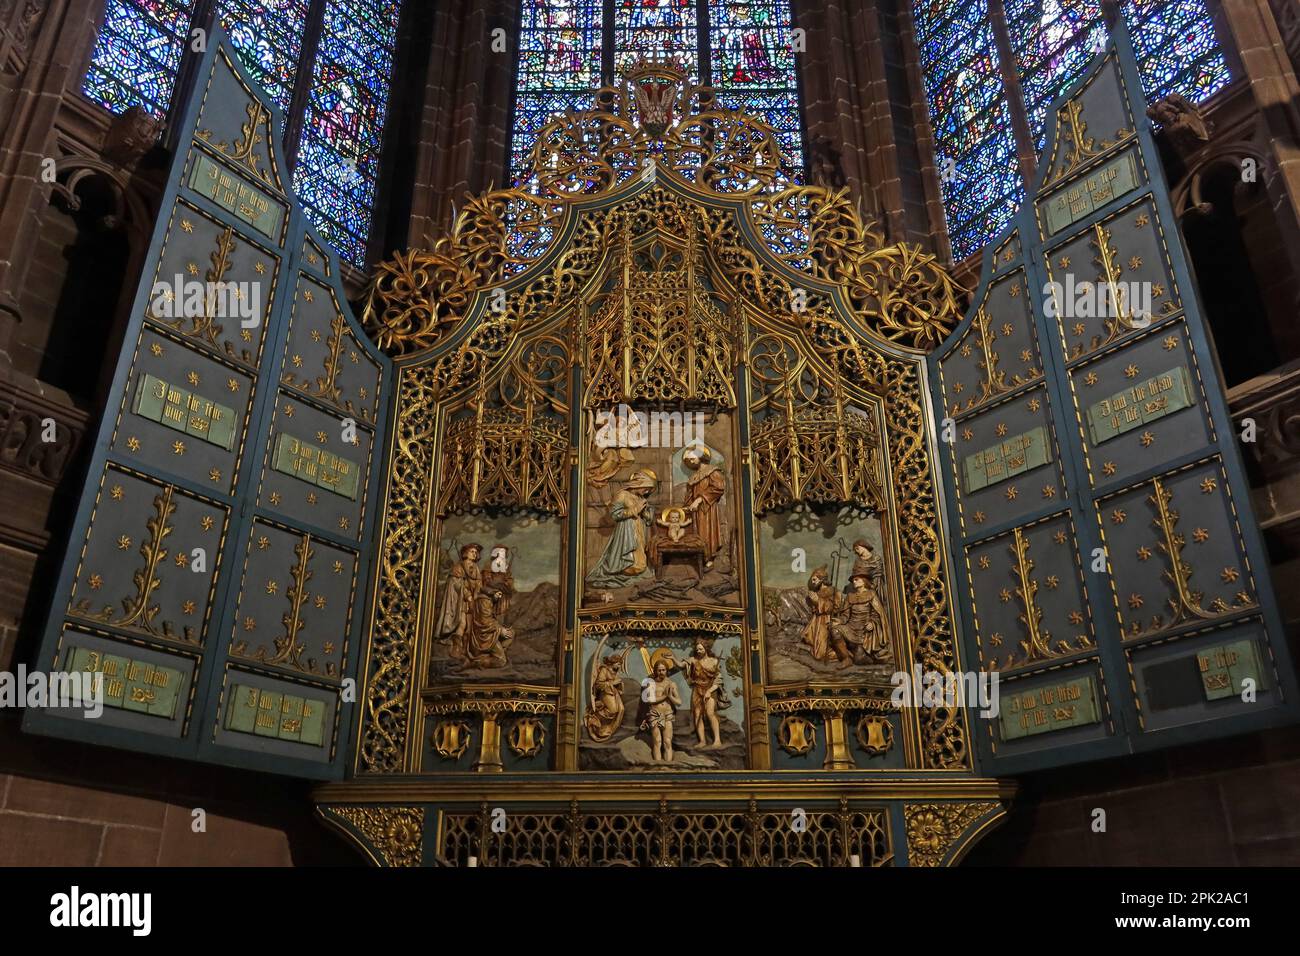 Scotts Lady Chapel, altar, Liverpool Anglican Cathedral, St James' Mount, Liverpool, Merseyside, England, UK, L1 7AZ Stock Photo